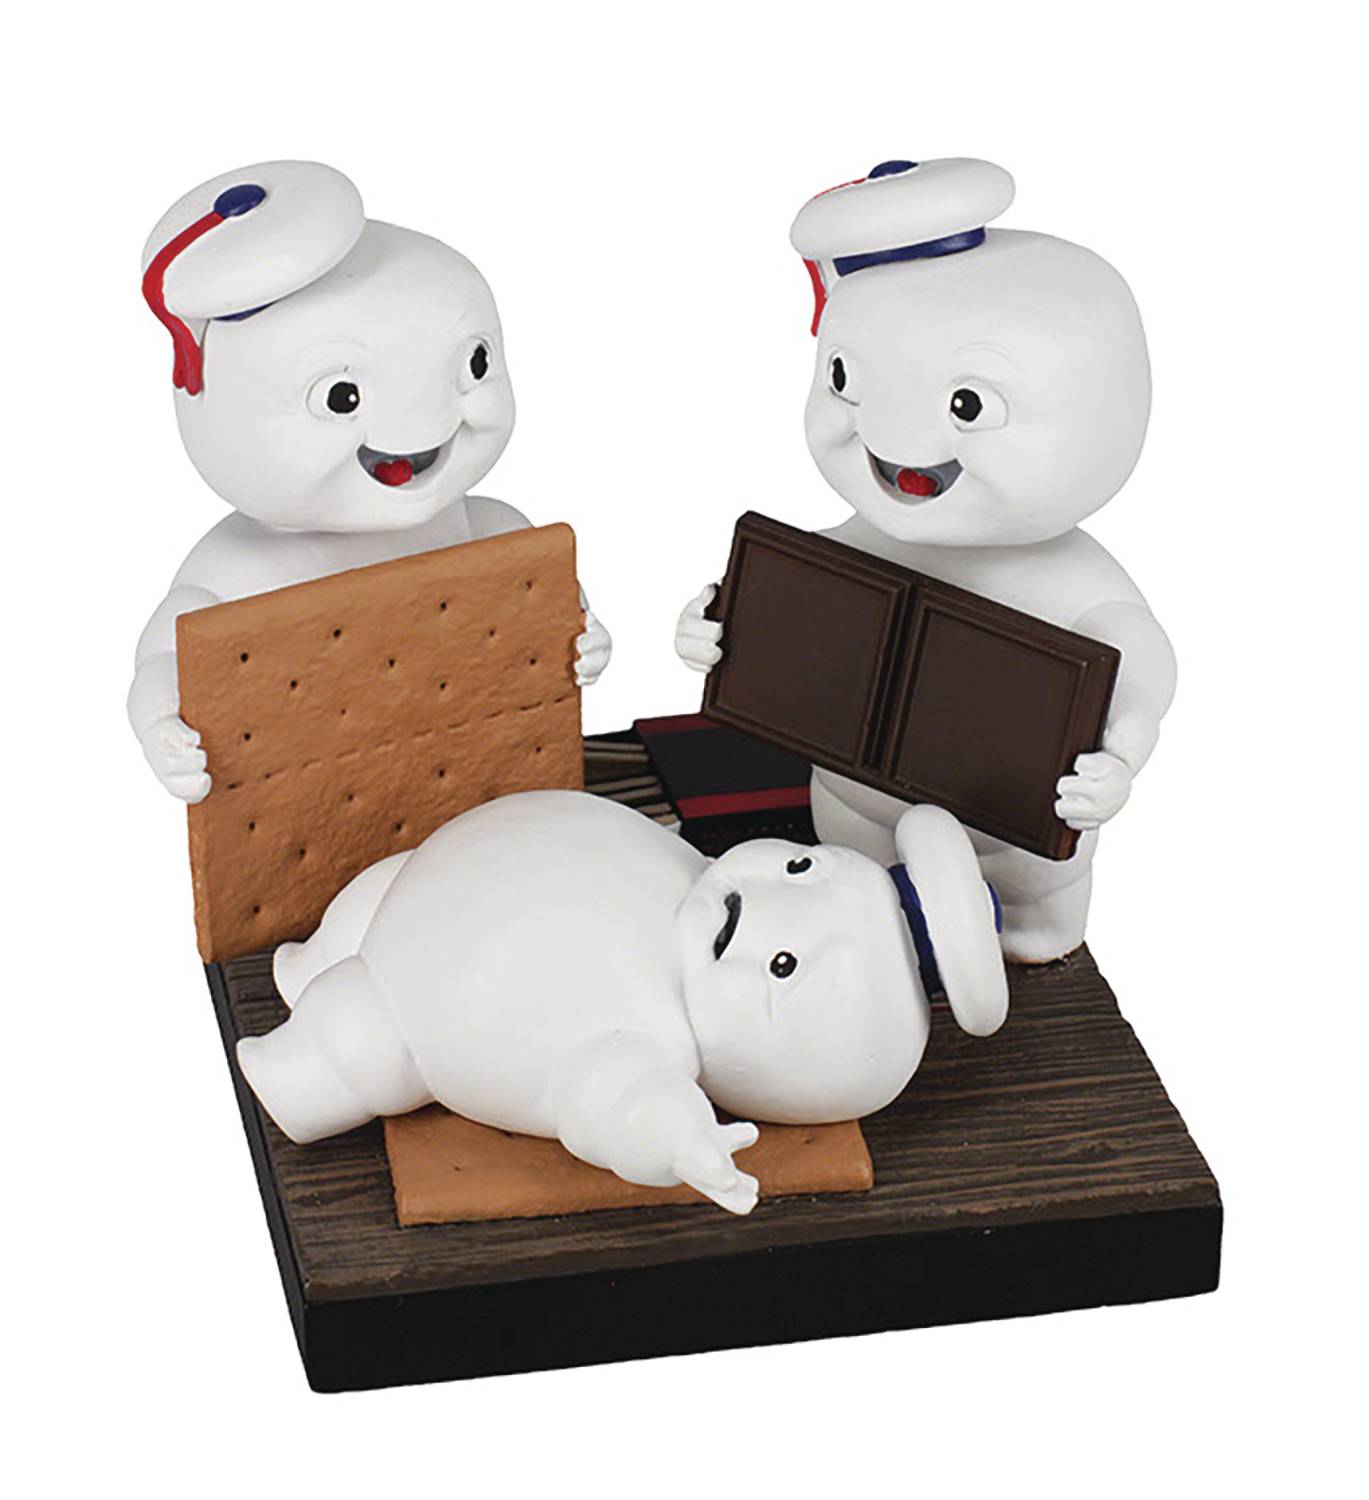 GHOSTBUSTERS NEW MINI PUFTS SMORES BOBBLE HEAD